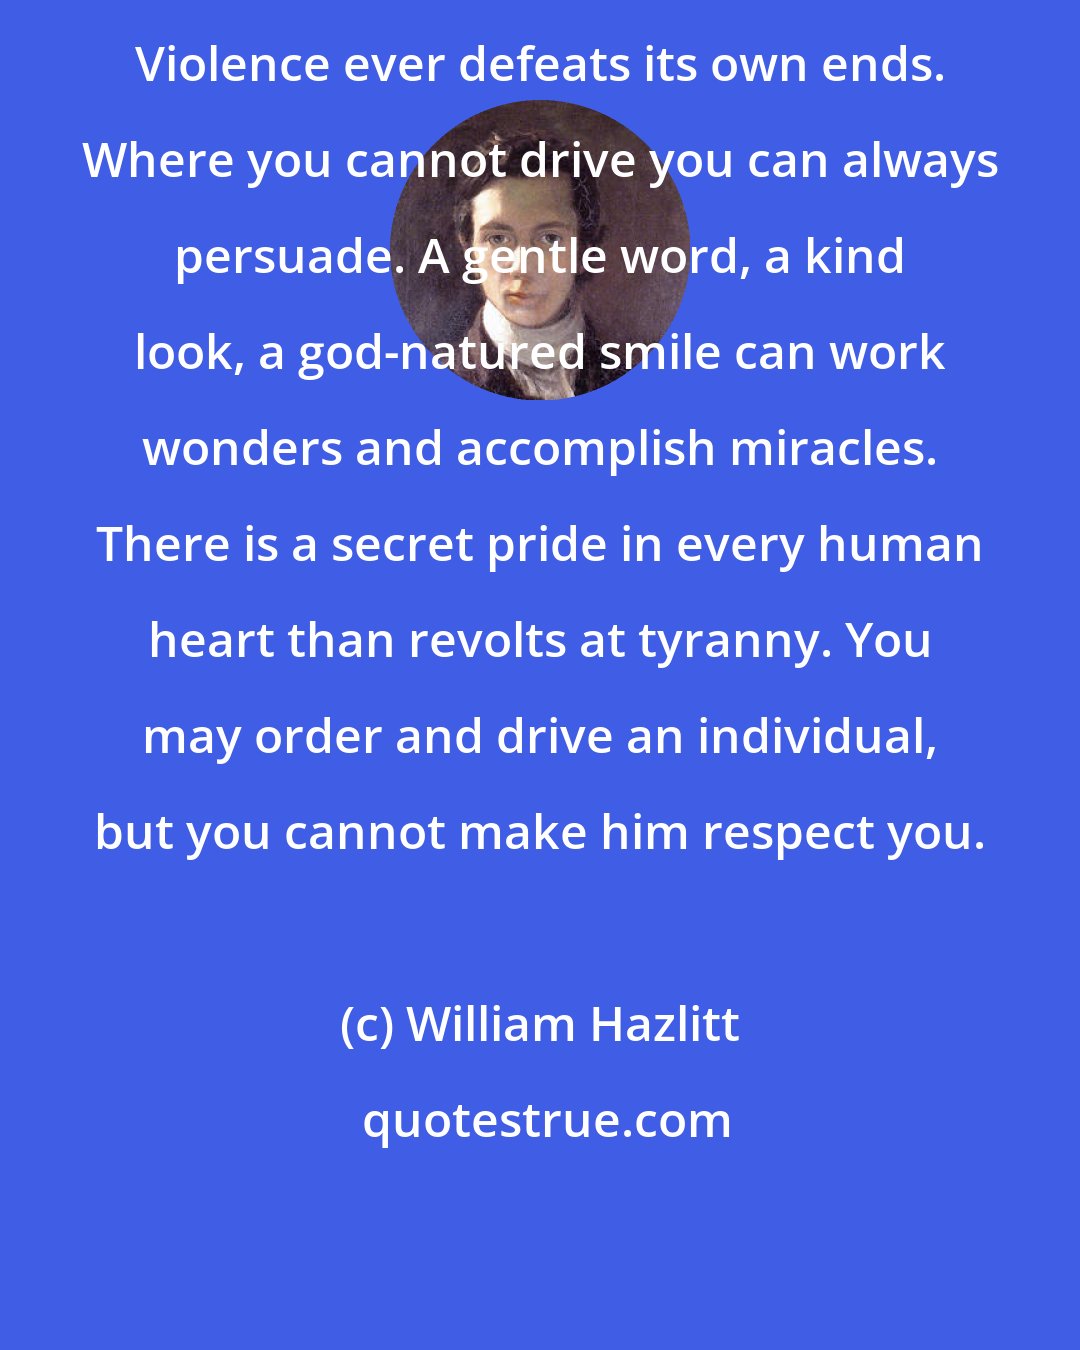 William Hazlitt: Violence ever defeats its own ends. Where you cannot drive you can always persuade. A gentle word, a kind look, a god-natured smile can work wonders and accomplish miracles. There is a secret pride in every human heart than revolts at tyranny. You may order and drive an individual, but you cannot make him respect you.